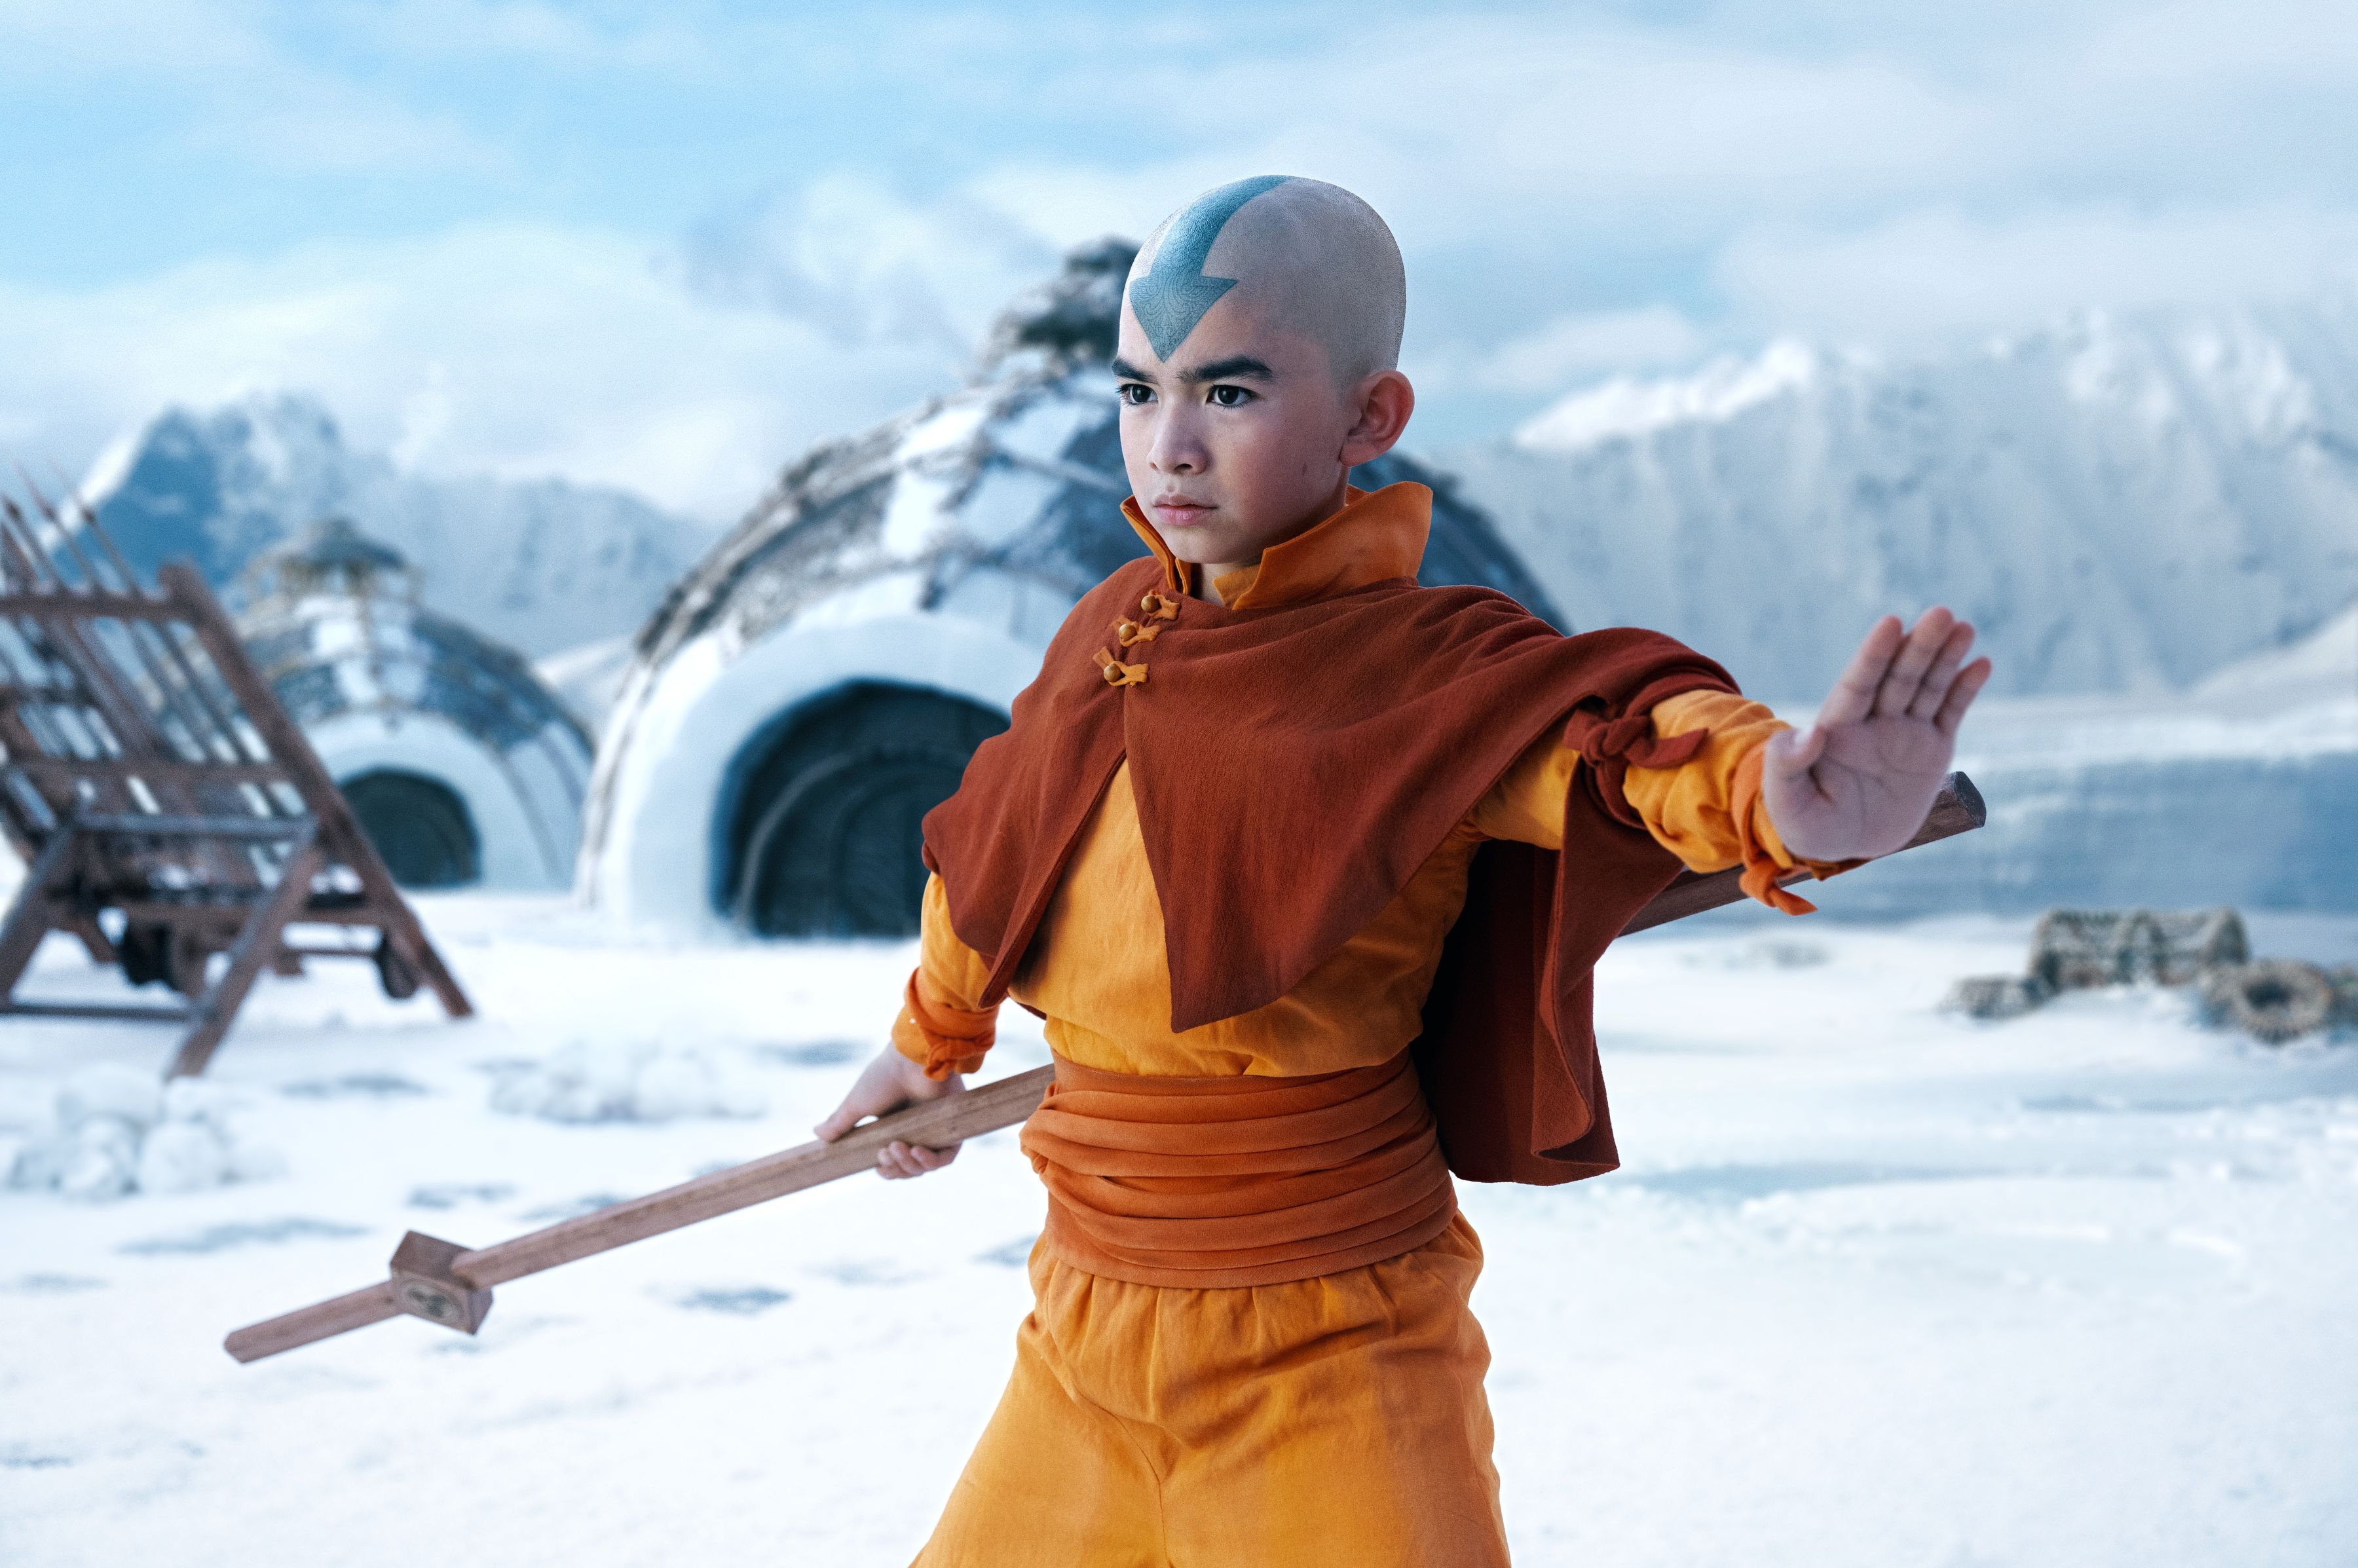 Avatar The Last Airbenders Aang And Zuko Actors Have A Friendly Rivalry  Brewing And Its Getting Fans Hyped For The Netflix Series